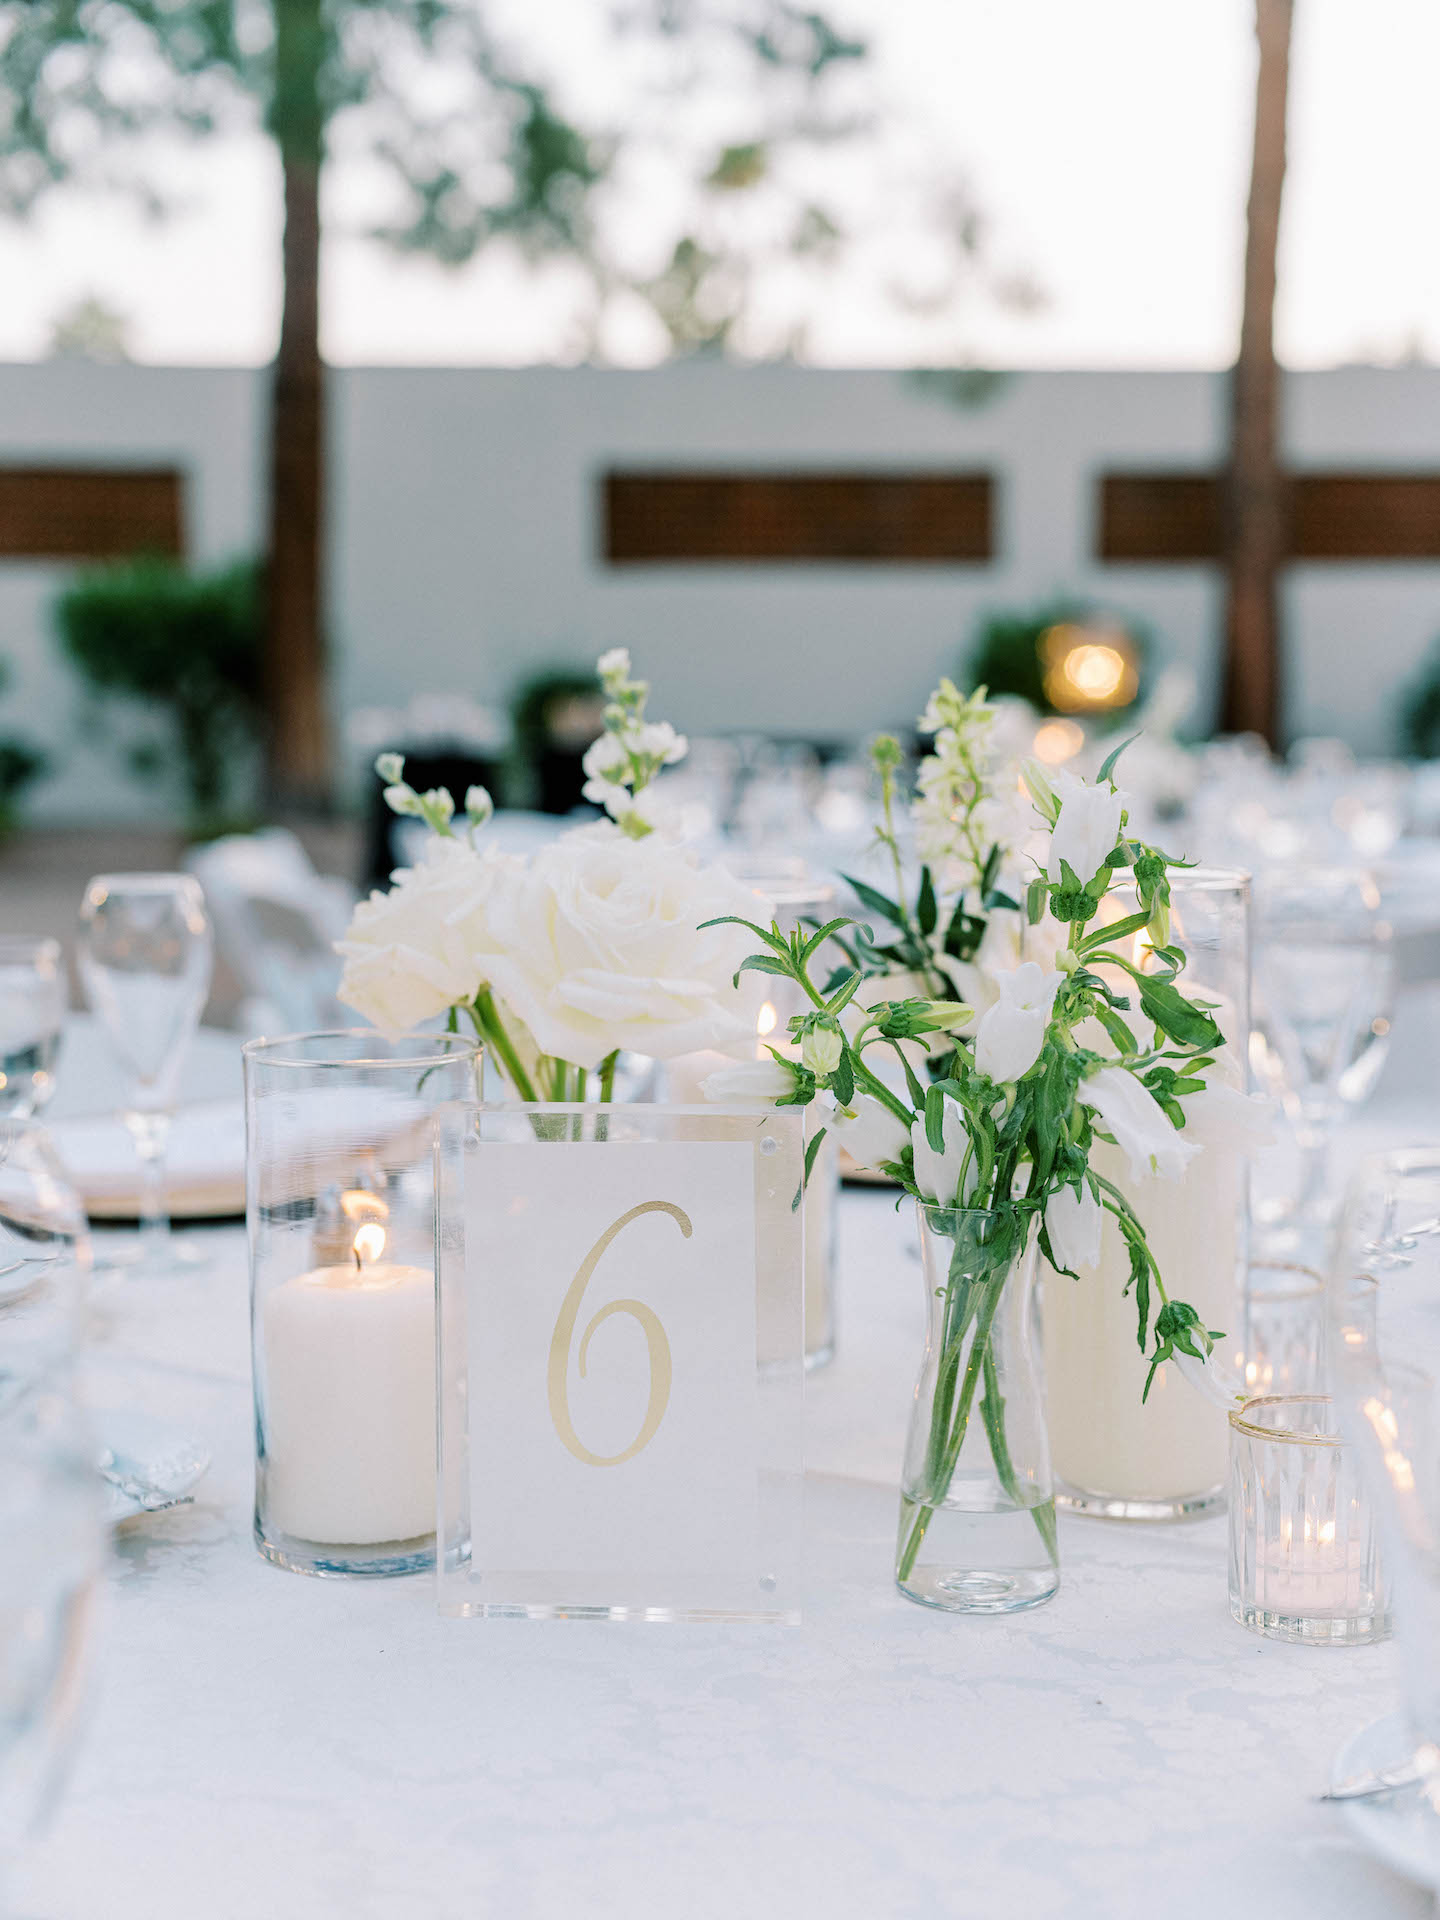 Wedding reception centerpiece of candles and white flowers bud vases and a glass etched table number.